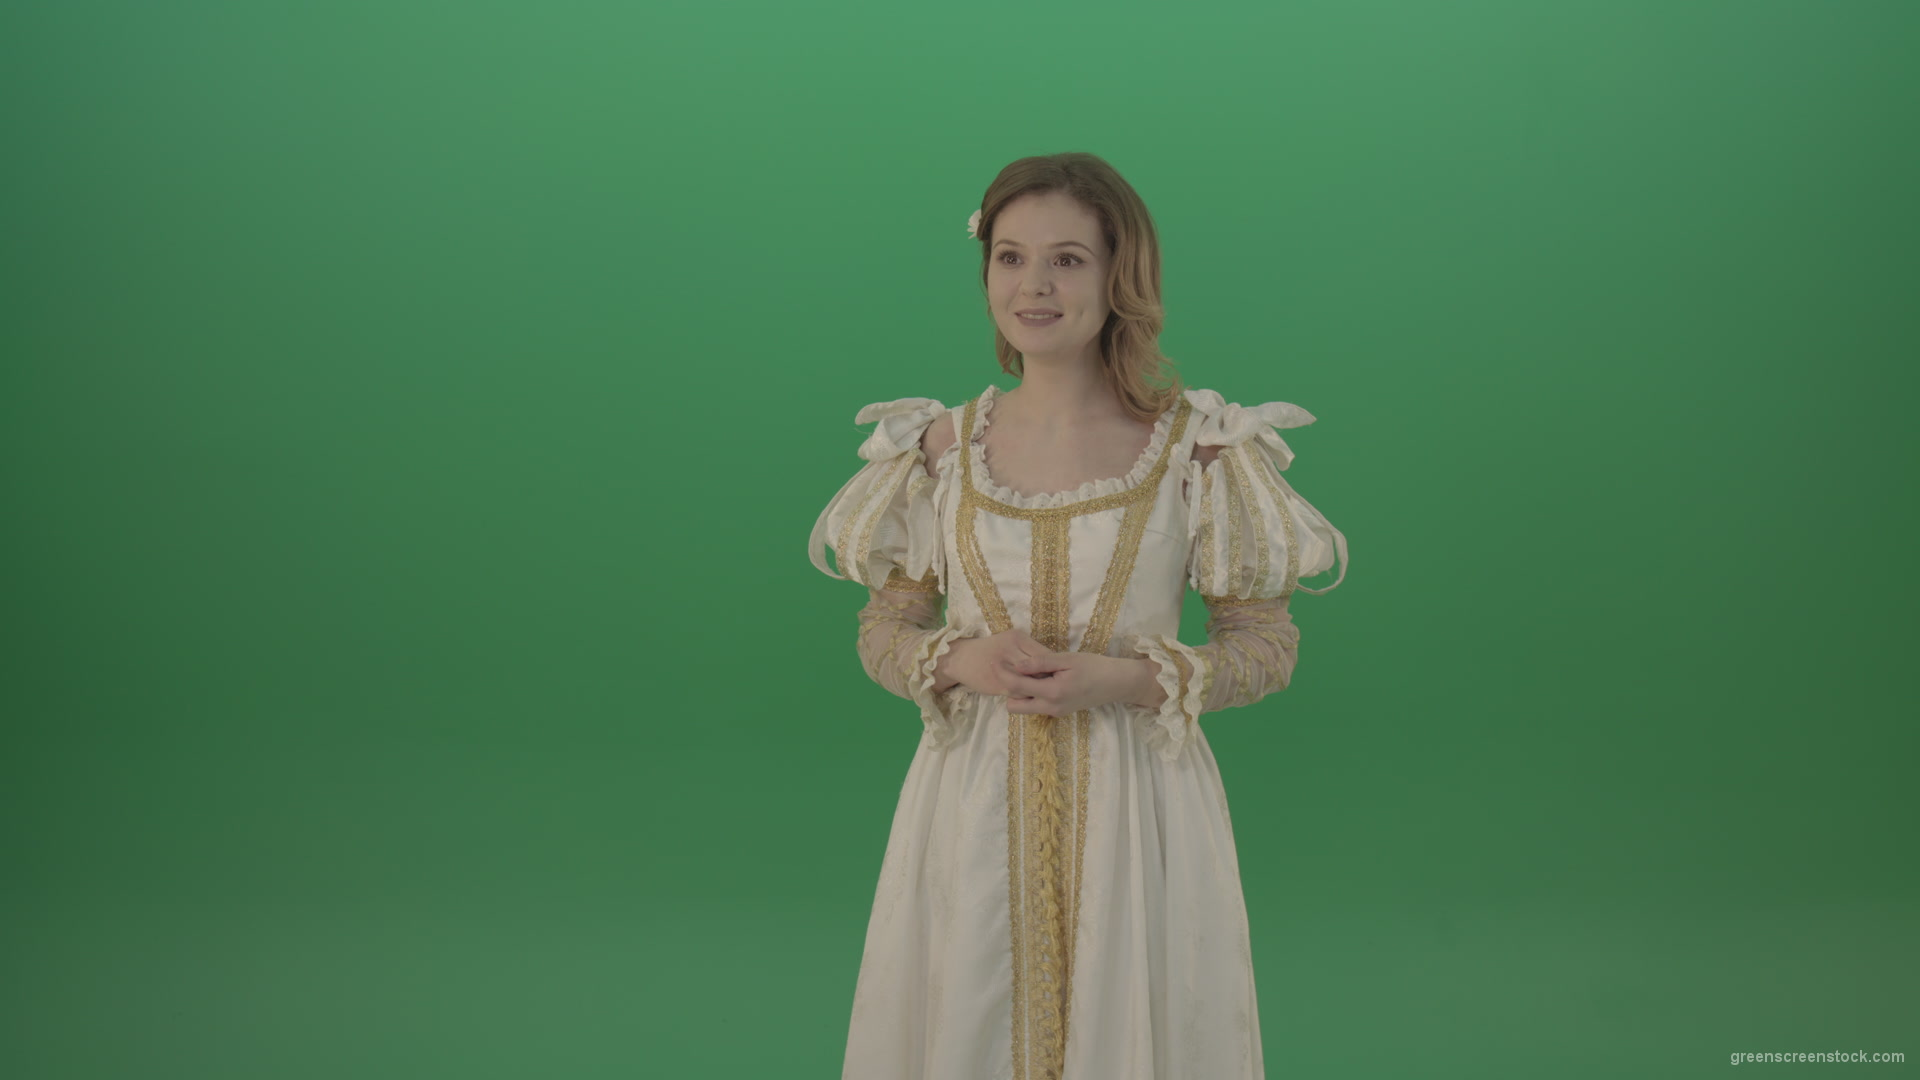 Medieval-girl-in-a-white-suit-looking-far-away-isolated-on-green-background_007 Green Screen Stock